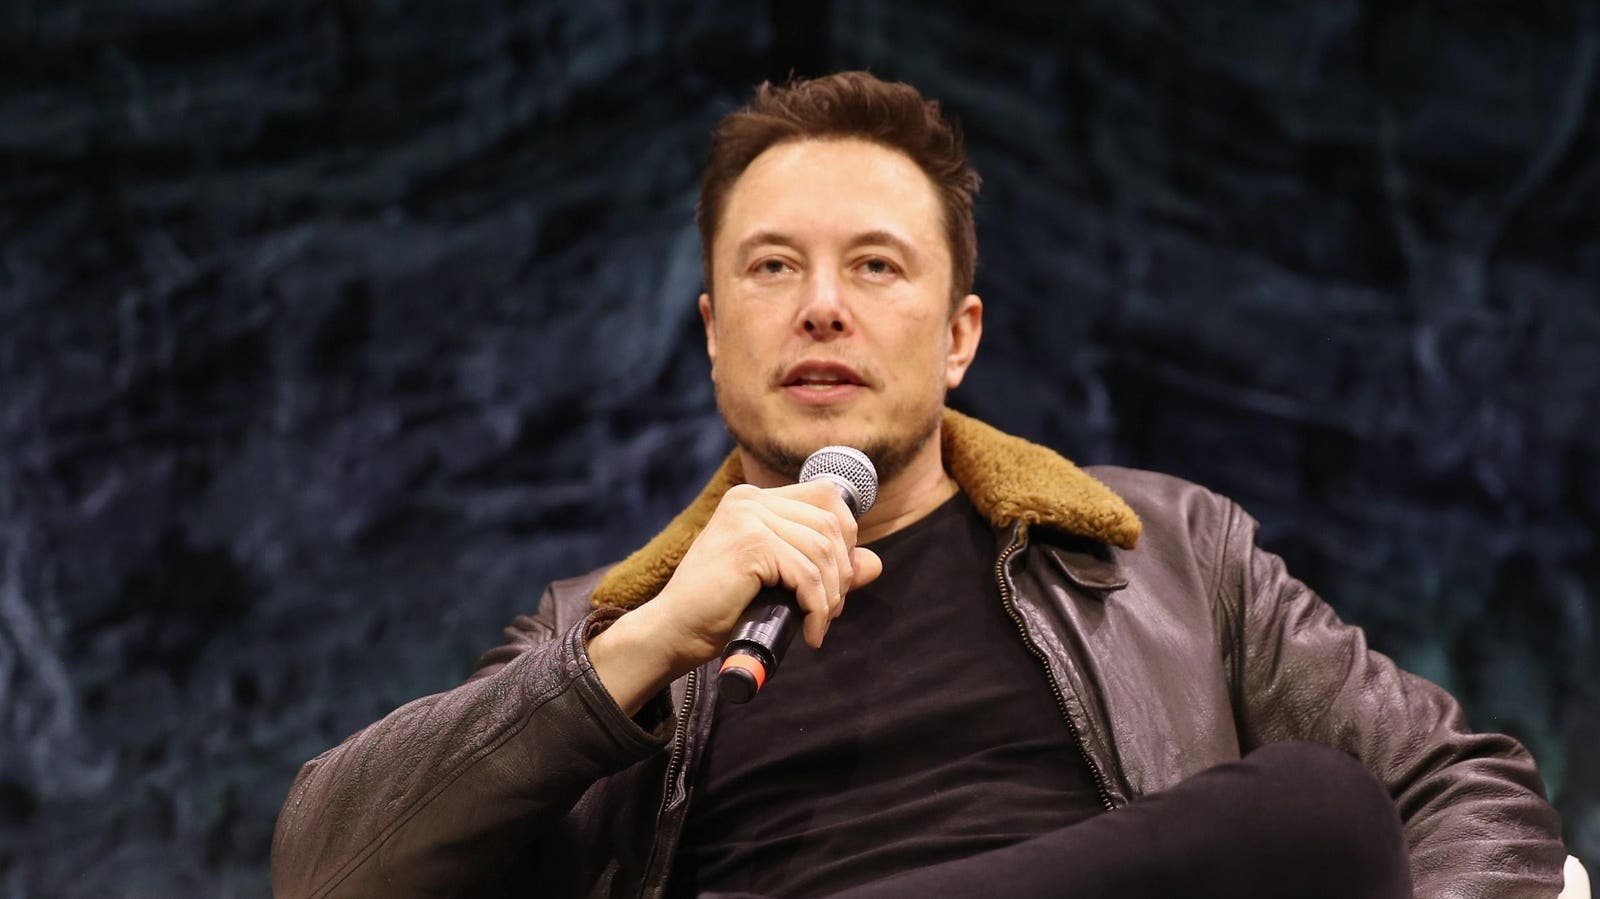 Elon Musk Condemned After Calling Antisemitic Post ‘Actual Truth’